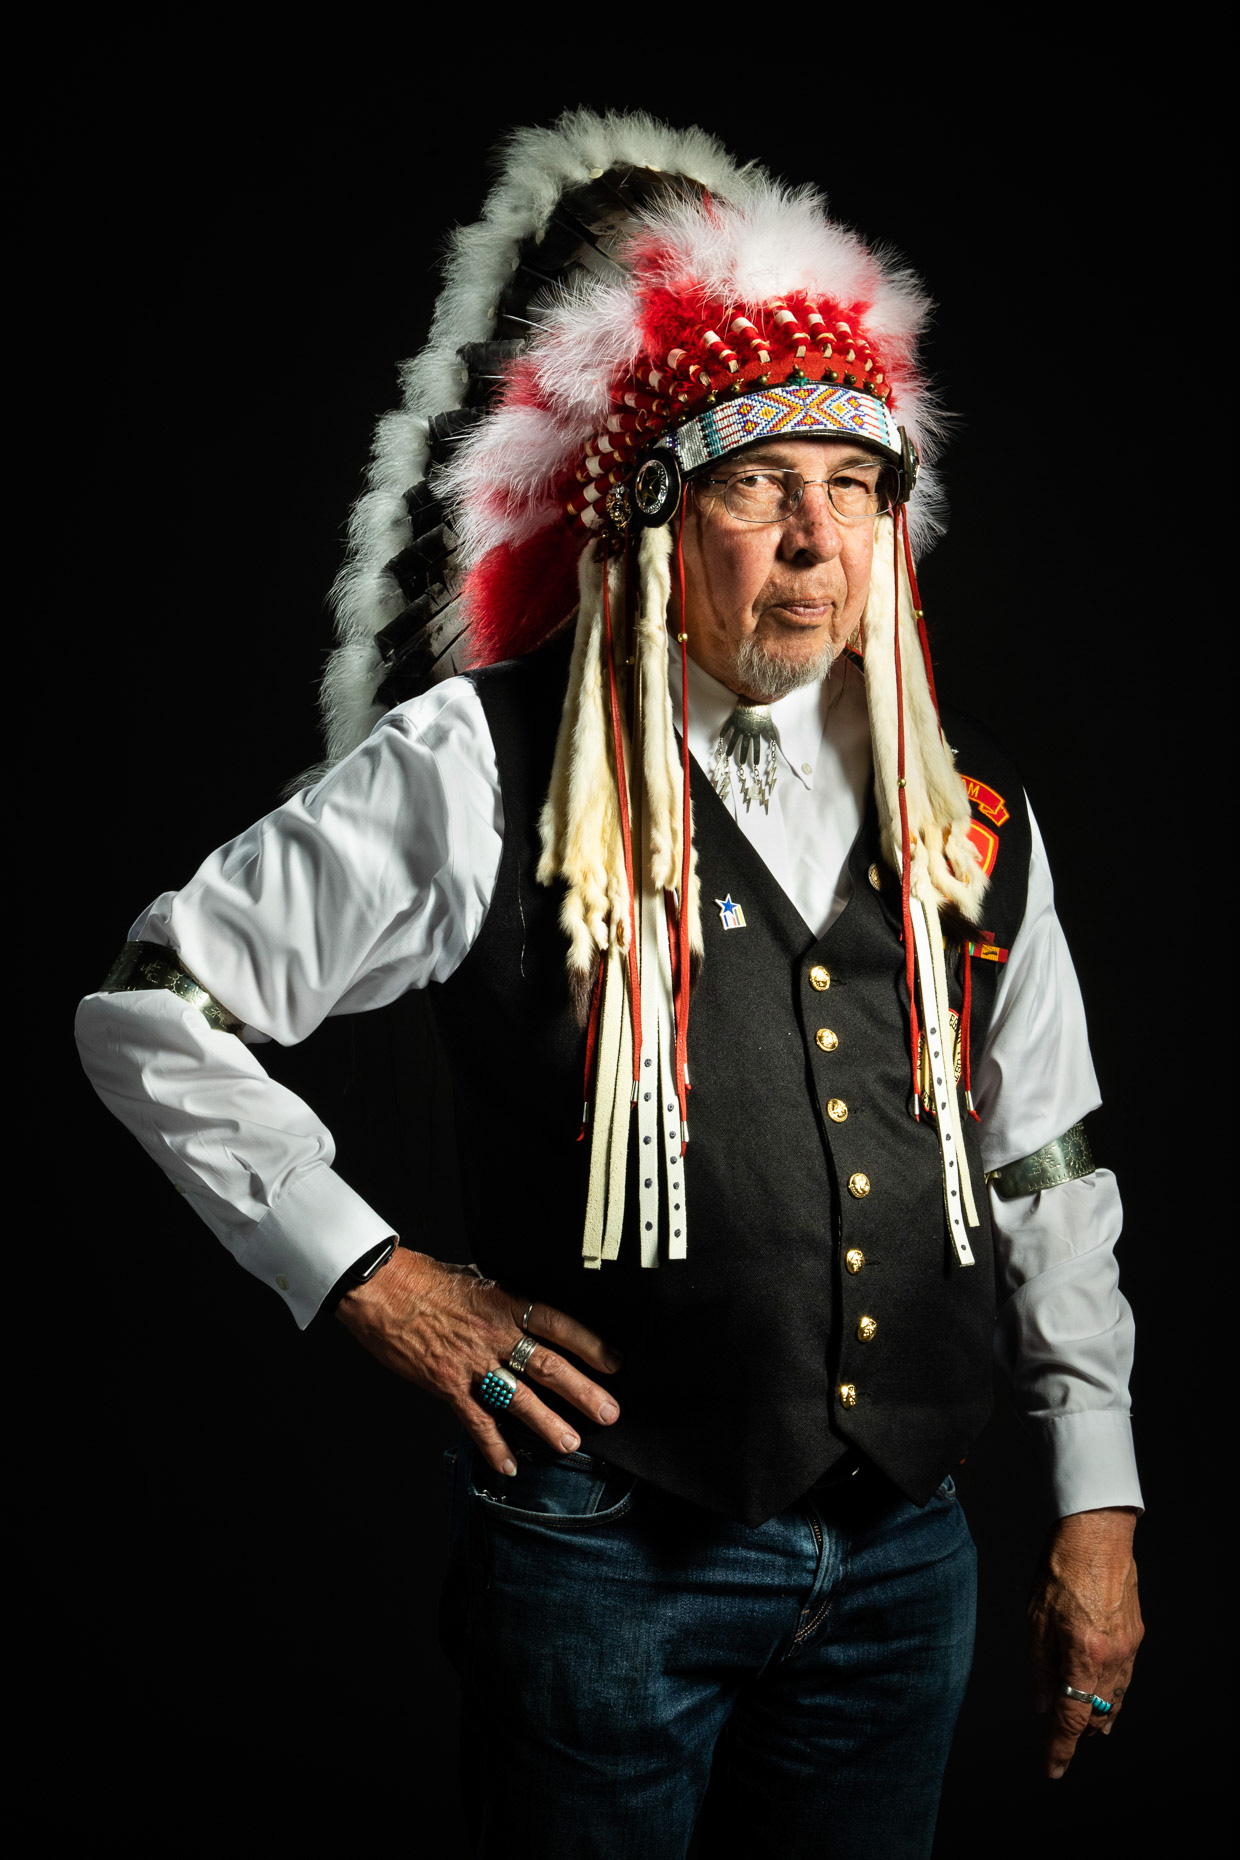 Cheyenne & Arapaho tribe member Harvey Pratt, Cheyenne Peace Chief, artist and retired forensic artist. Portrait commission for the First Americans Museum. Brett Deering Photography 